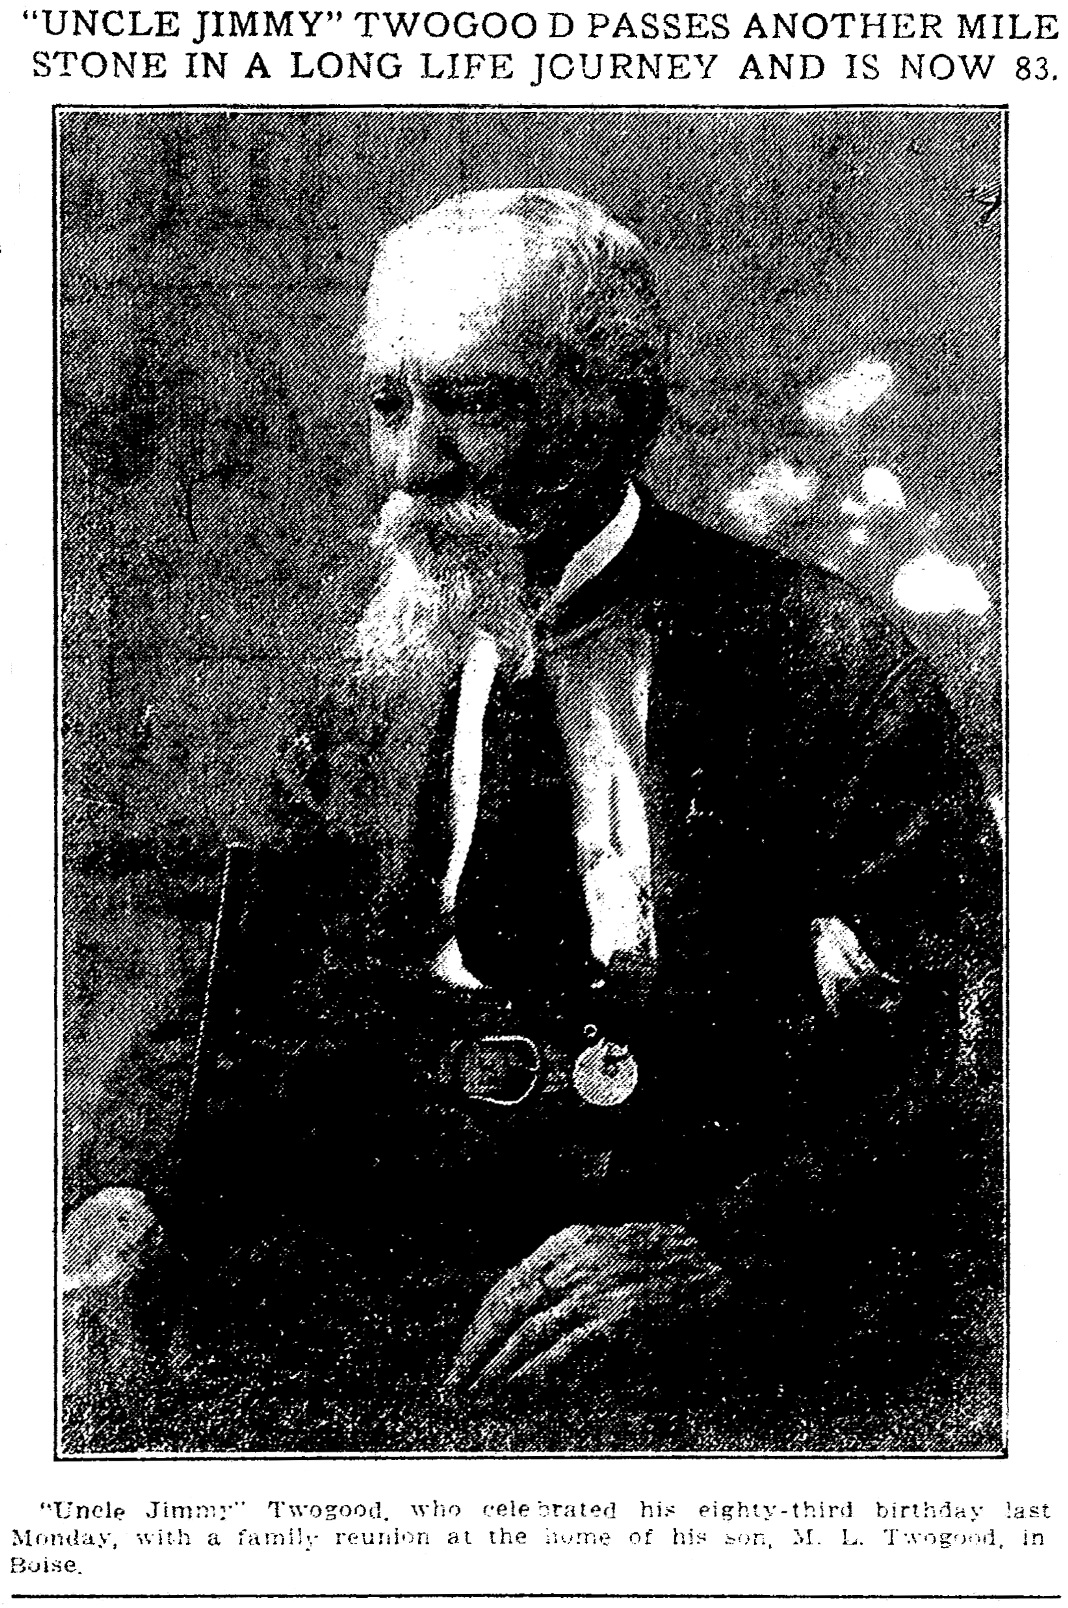 James H. Twogood, July 17, 1909 Boise Evening Capital News, page 7